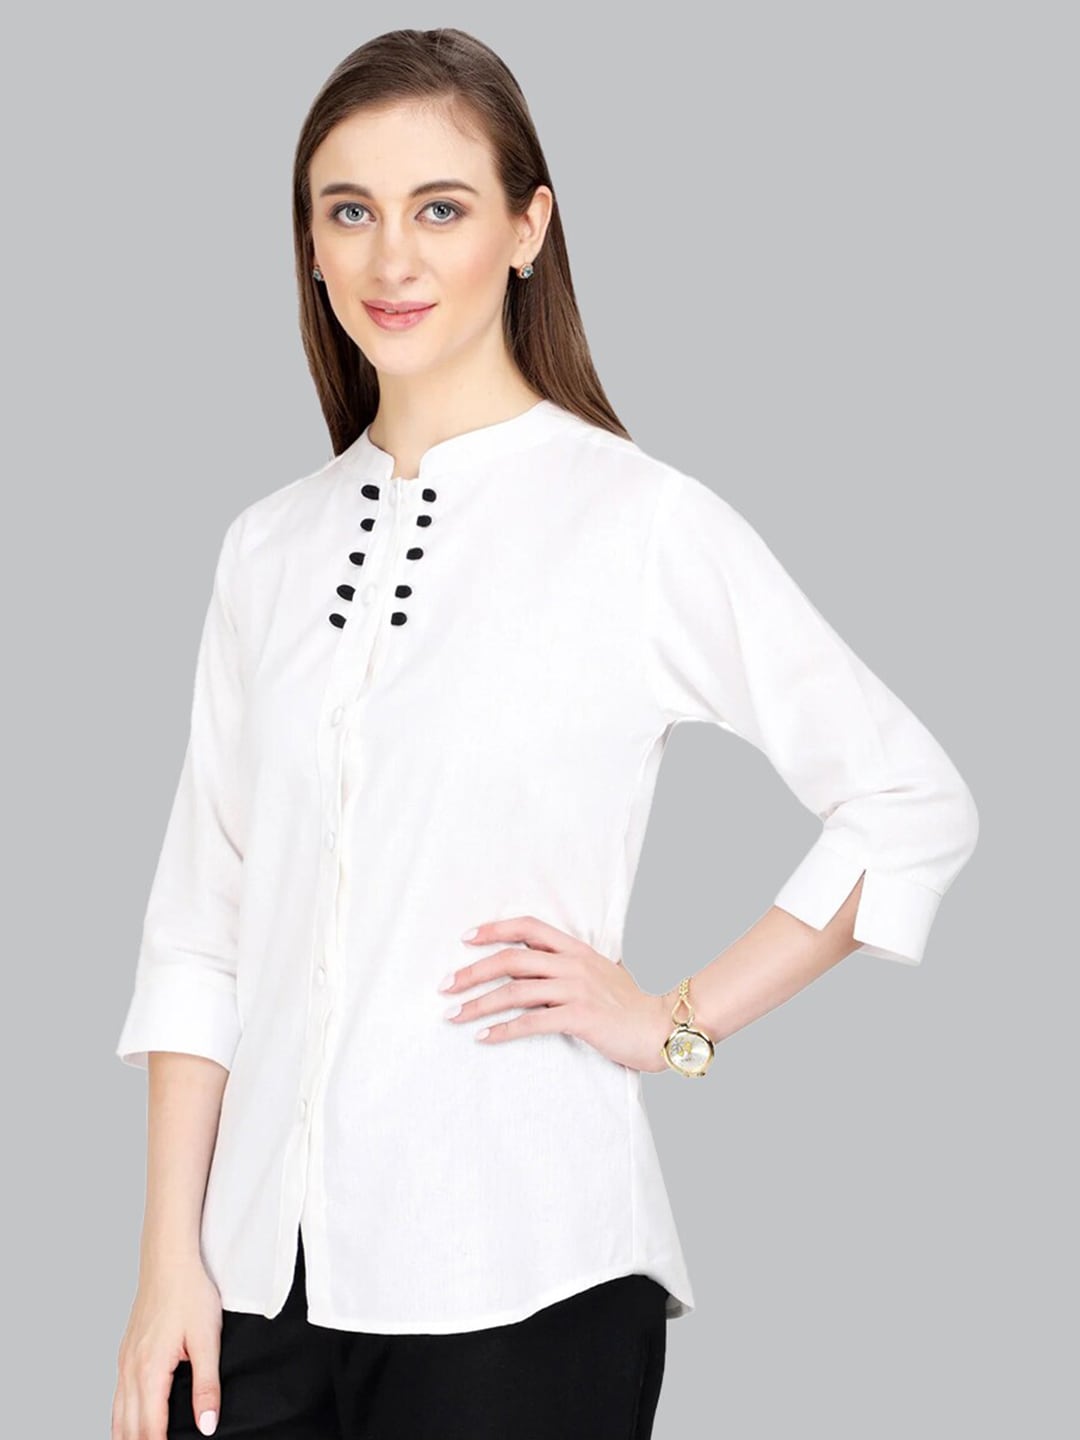 CUFFS N LASHES Mandarin Collar Shirt Style Cotton Top Price in India